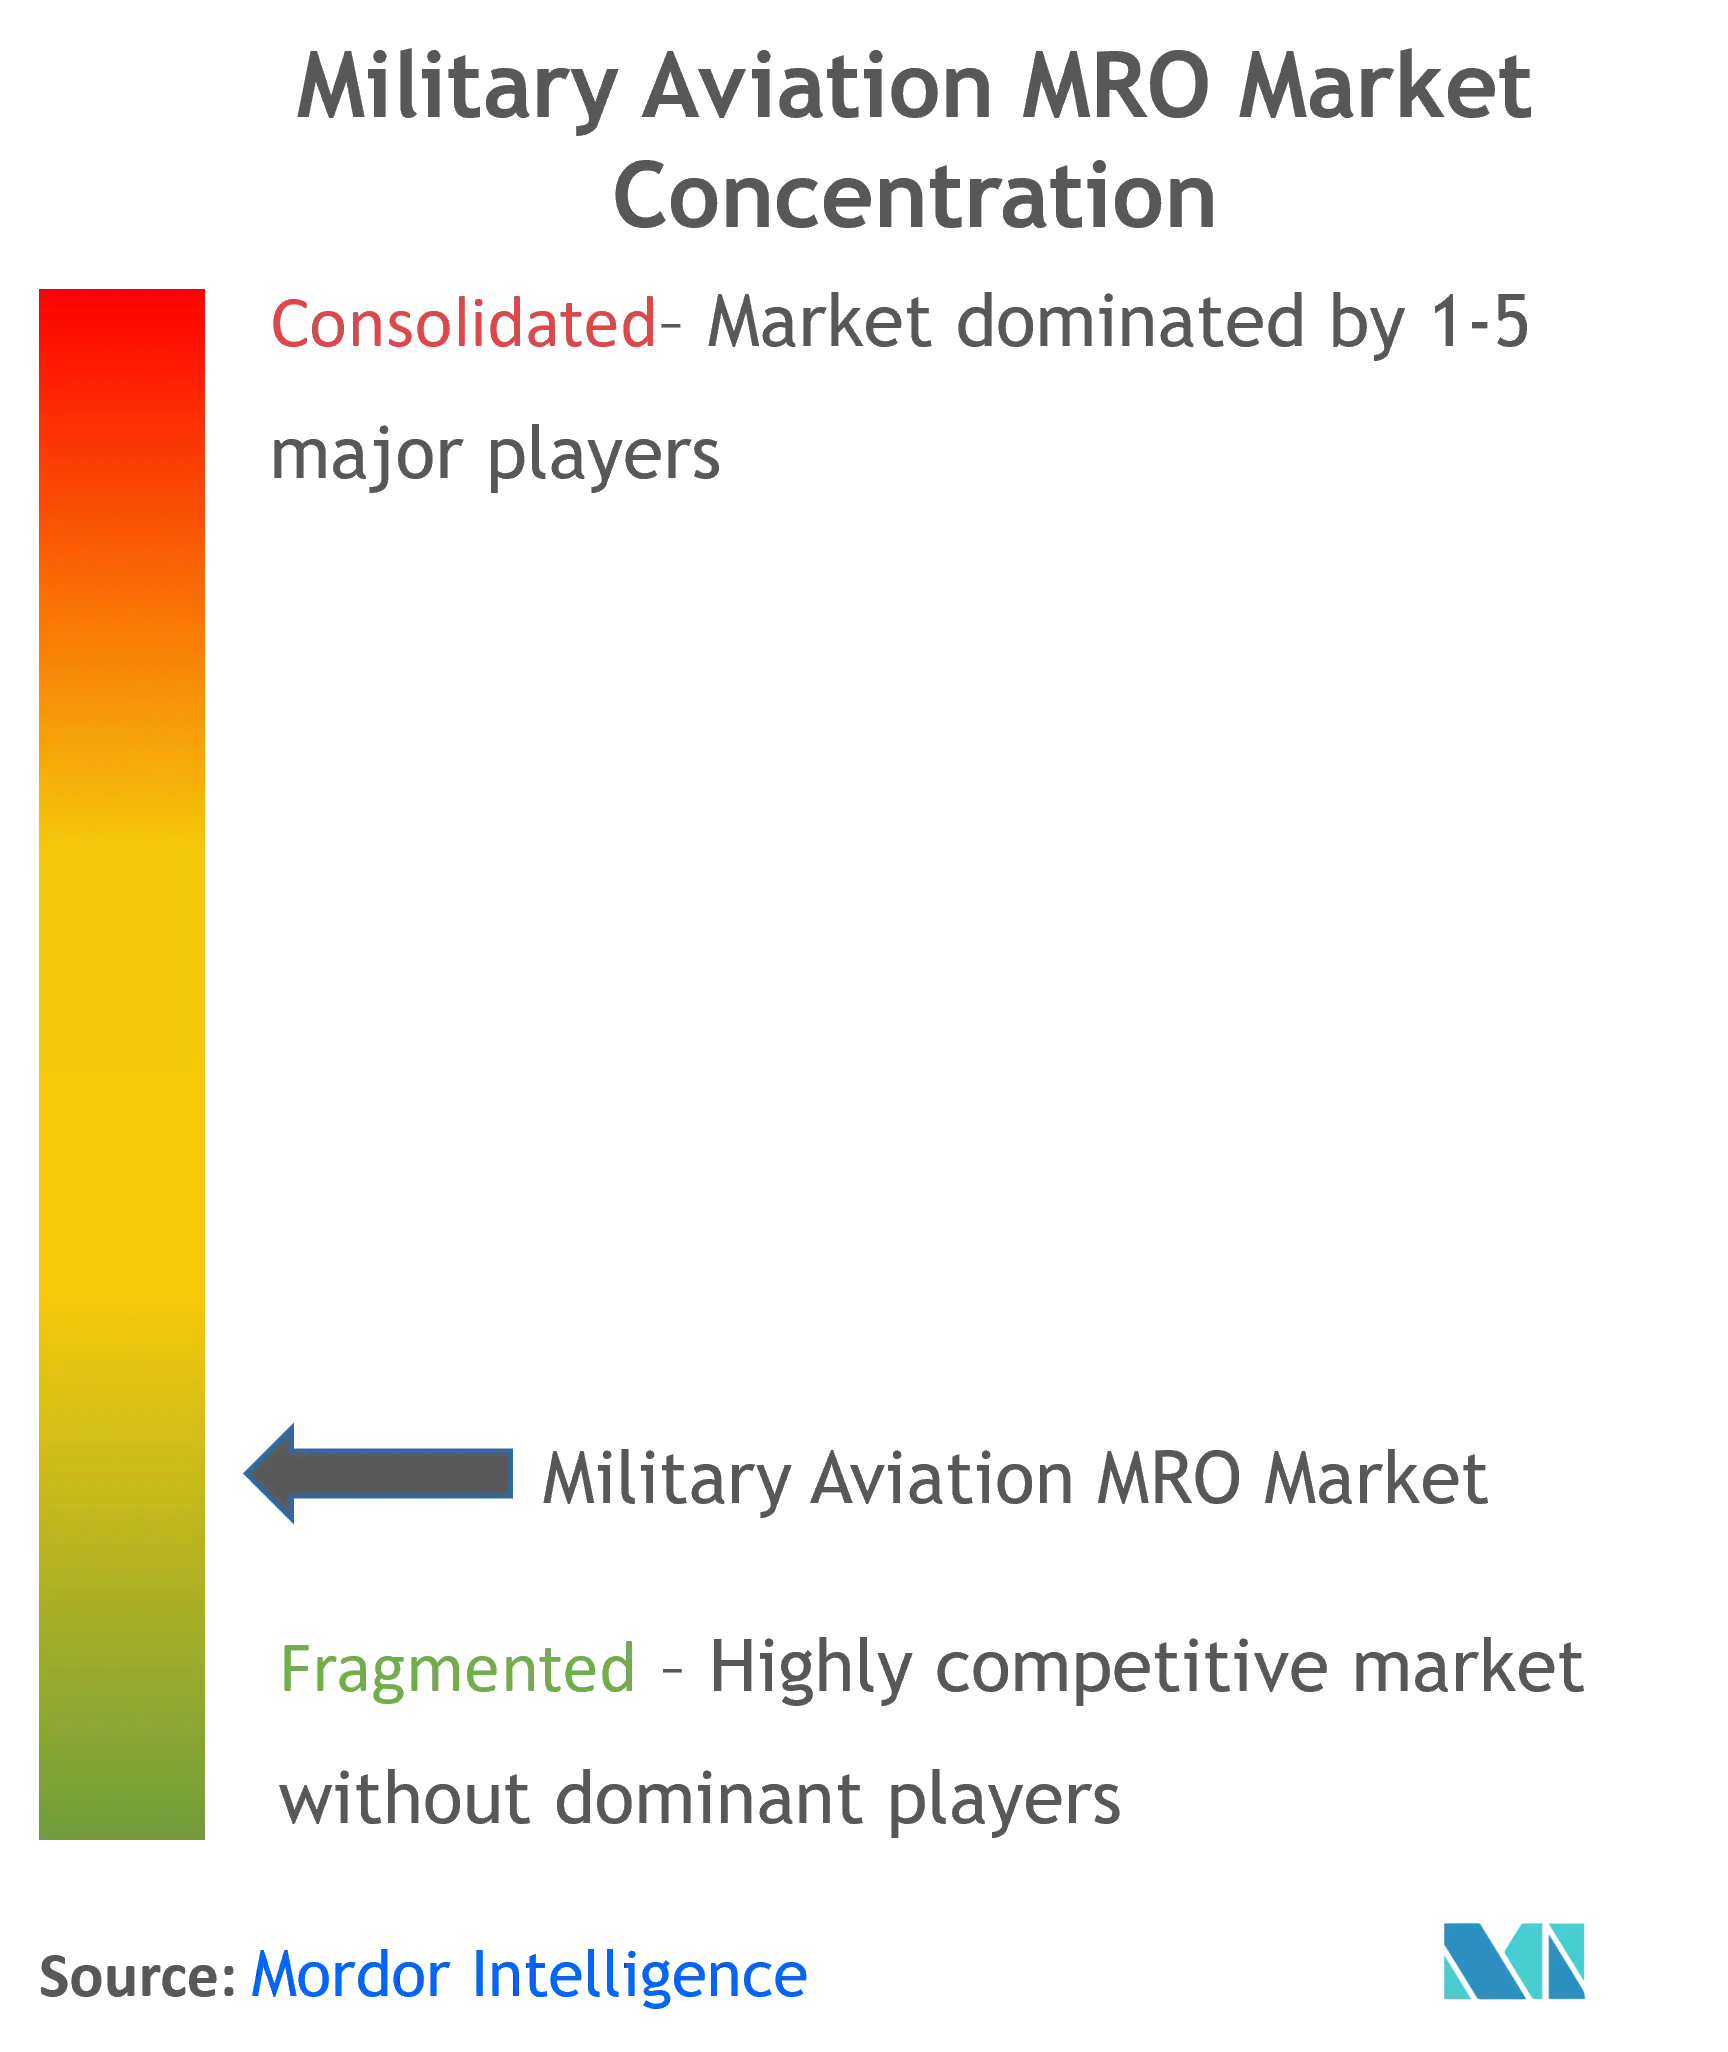 Military Aviation Maintenance, Repair, and Overhaul Market Concentration